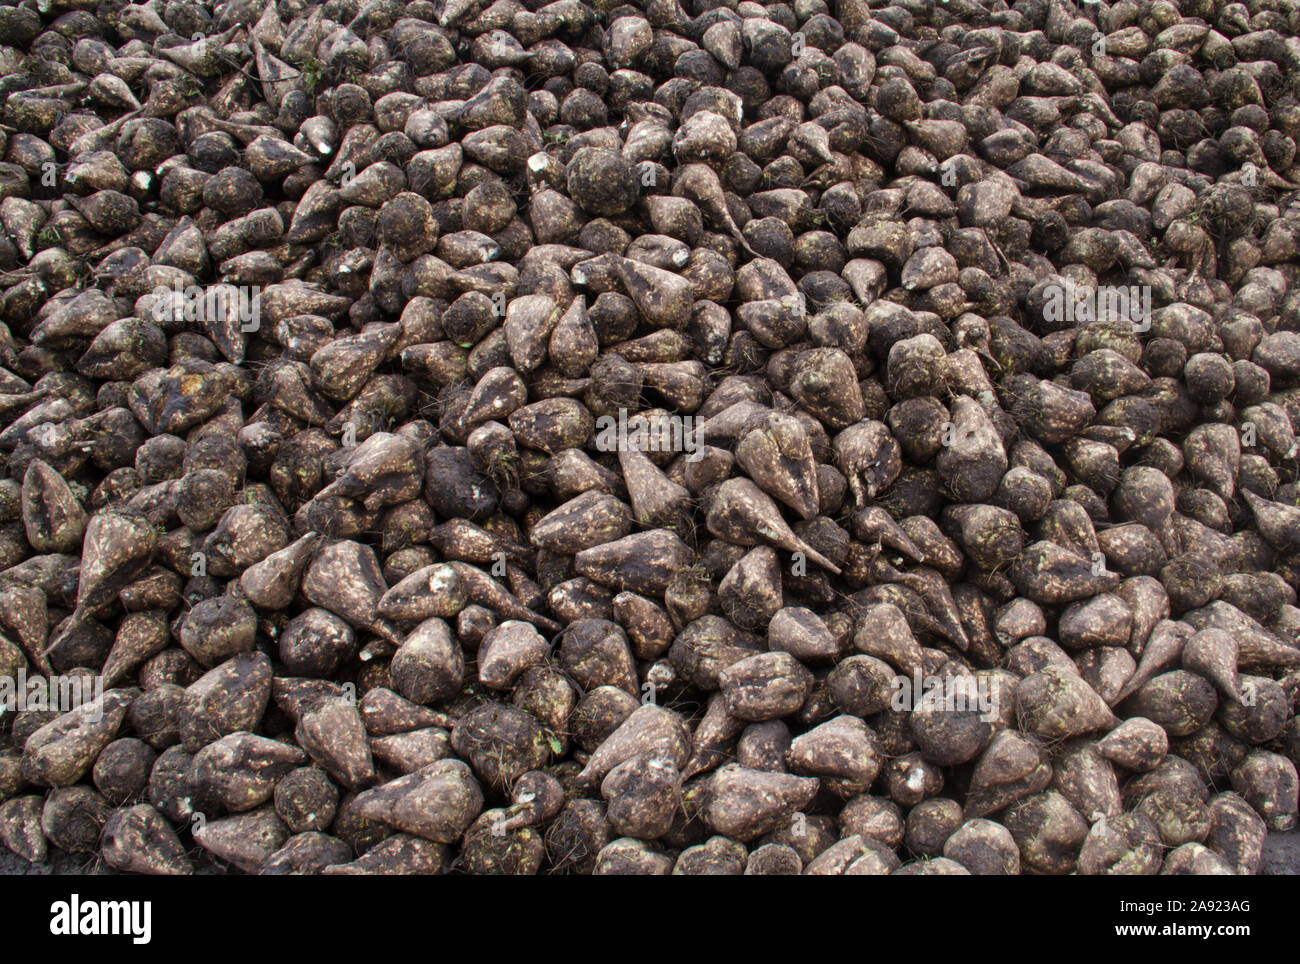 Heap of Sugar beet in autumn after harvest Stock Photo